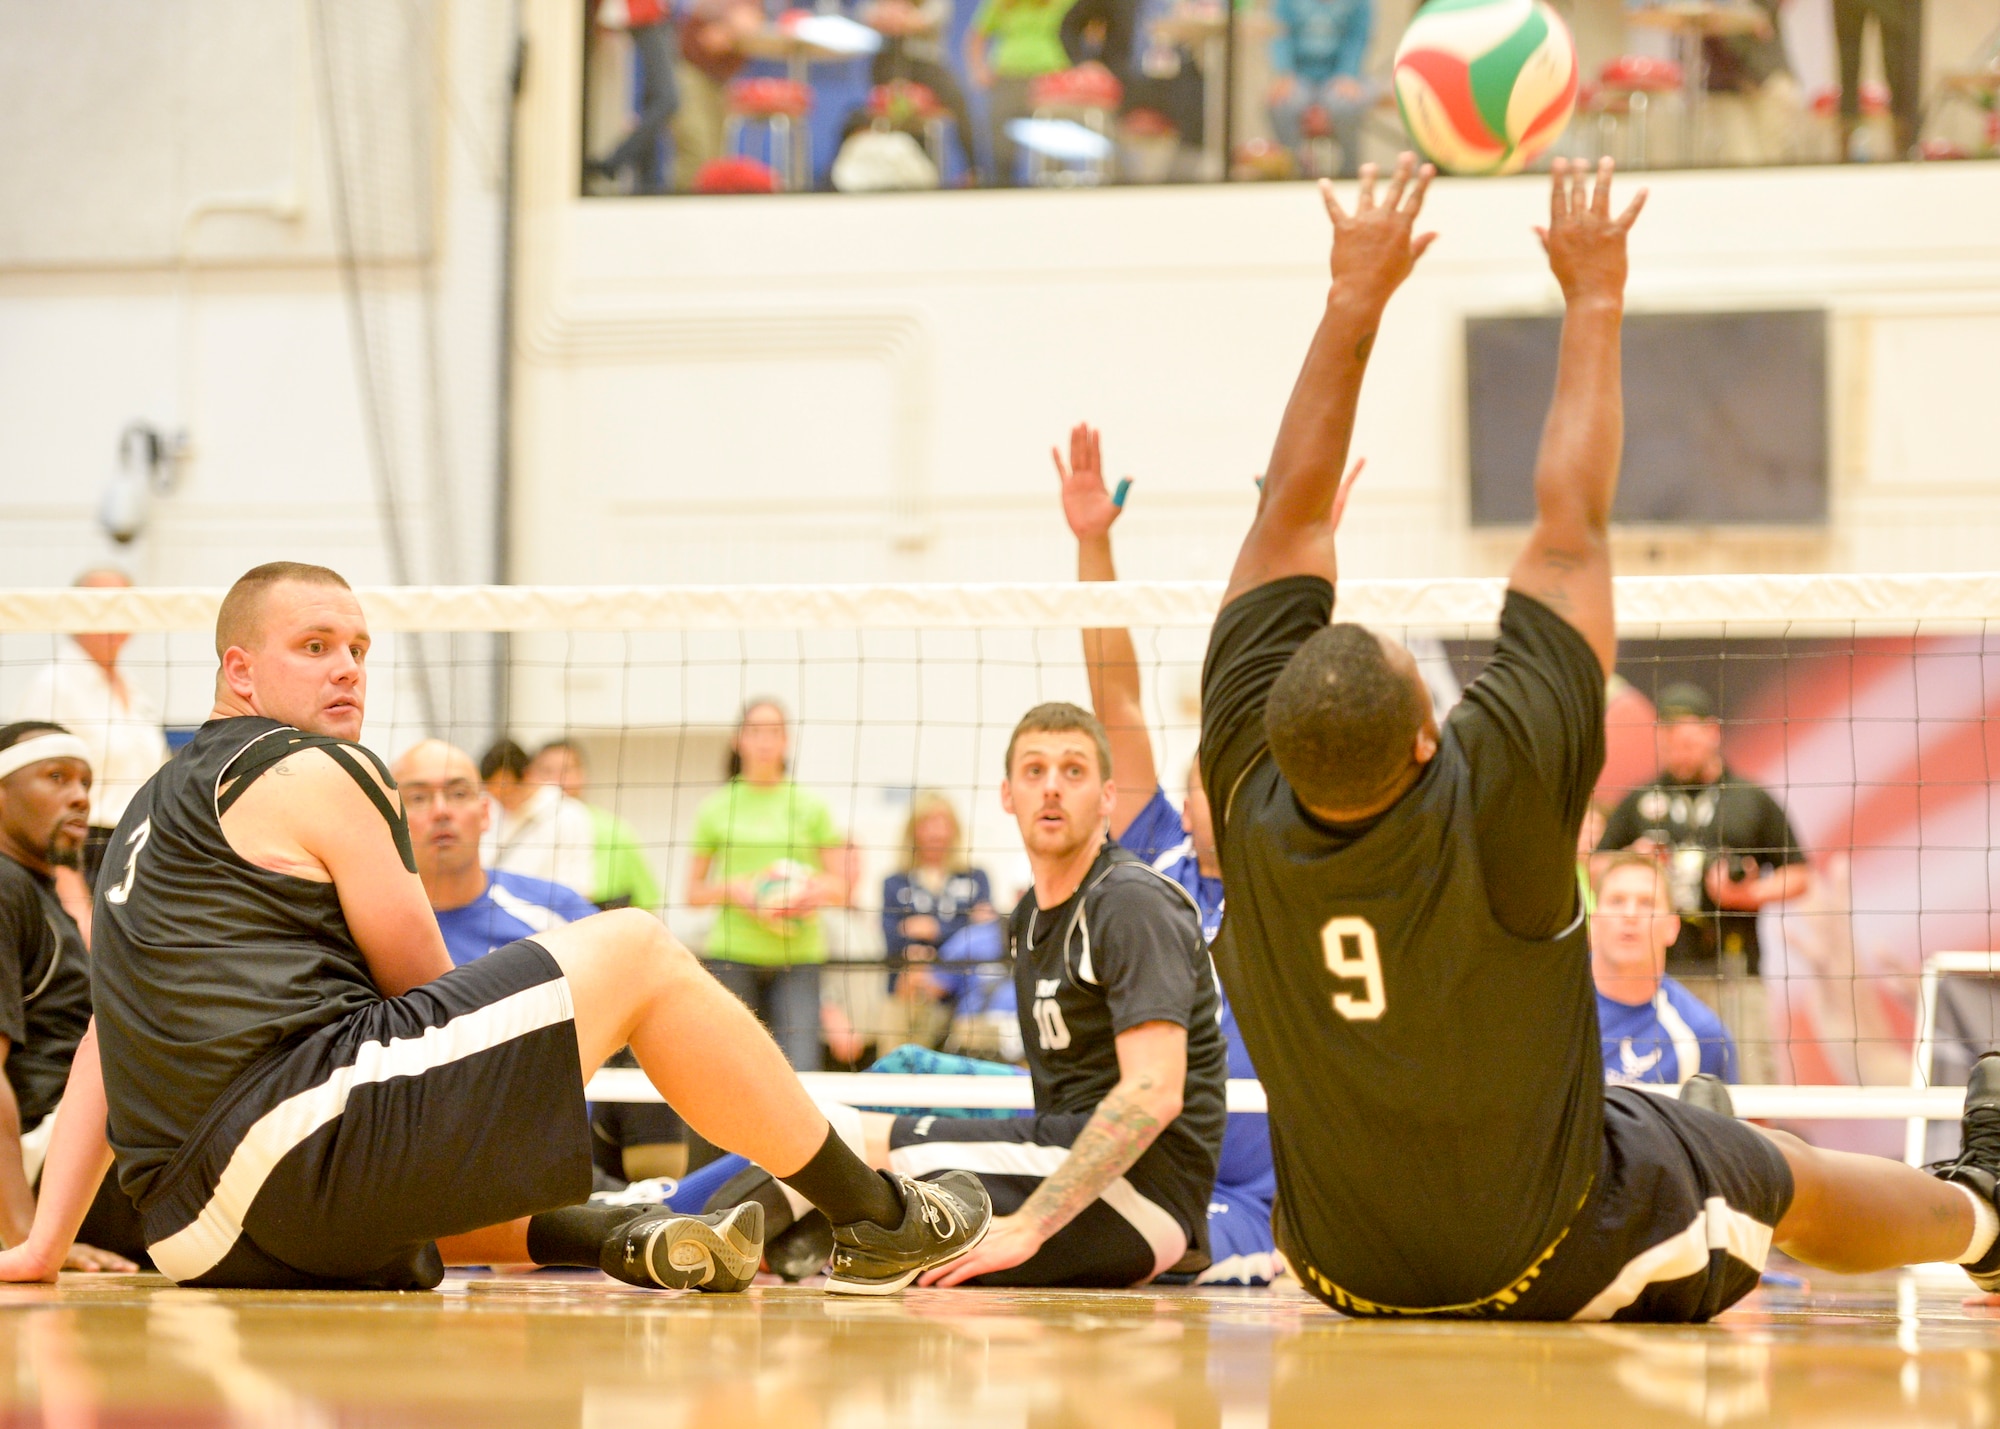 The Air Force and Army competed in the sitting volleyball bronze medal match at the 2014 Warrior Games Oct. 1, 2014, at the U.S. Olympic Training Center in Colorado Springs, Colo. The Army beat the Air Force in two sets, 25-20, 25-19. (U.S. Air Force photo/Staff Sgt. Devon Suits)